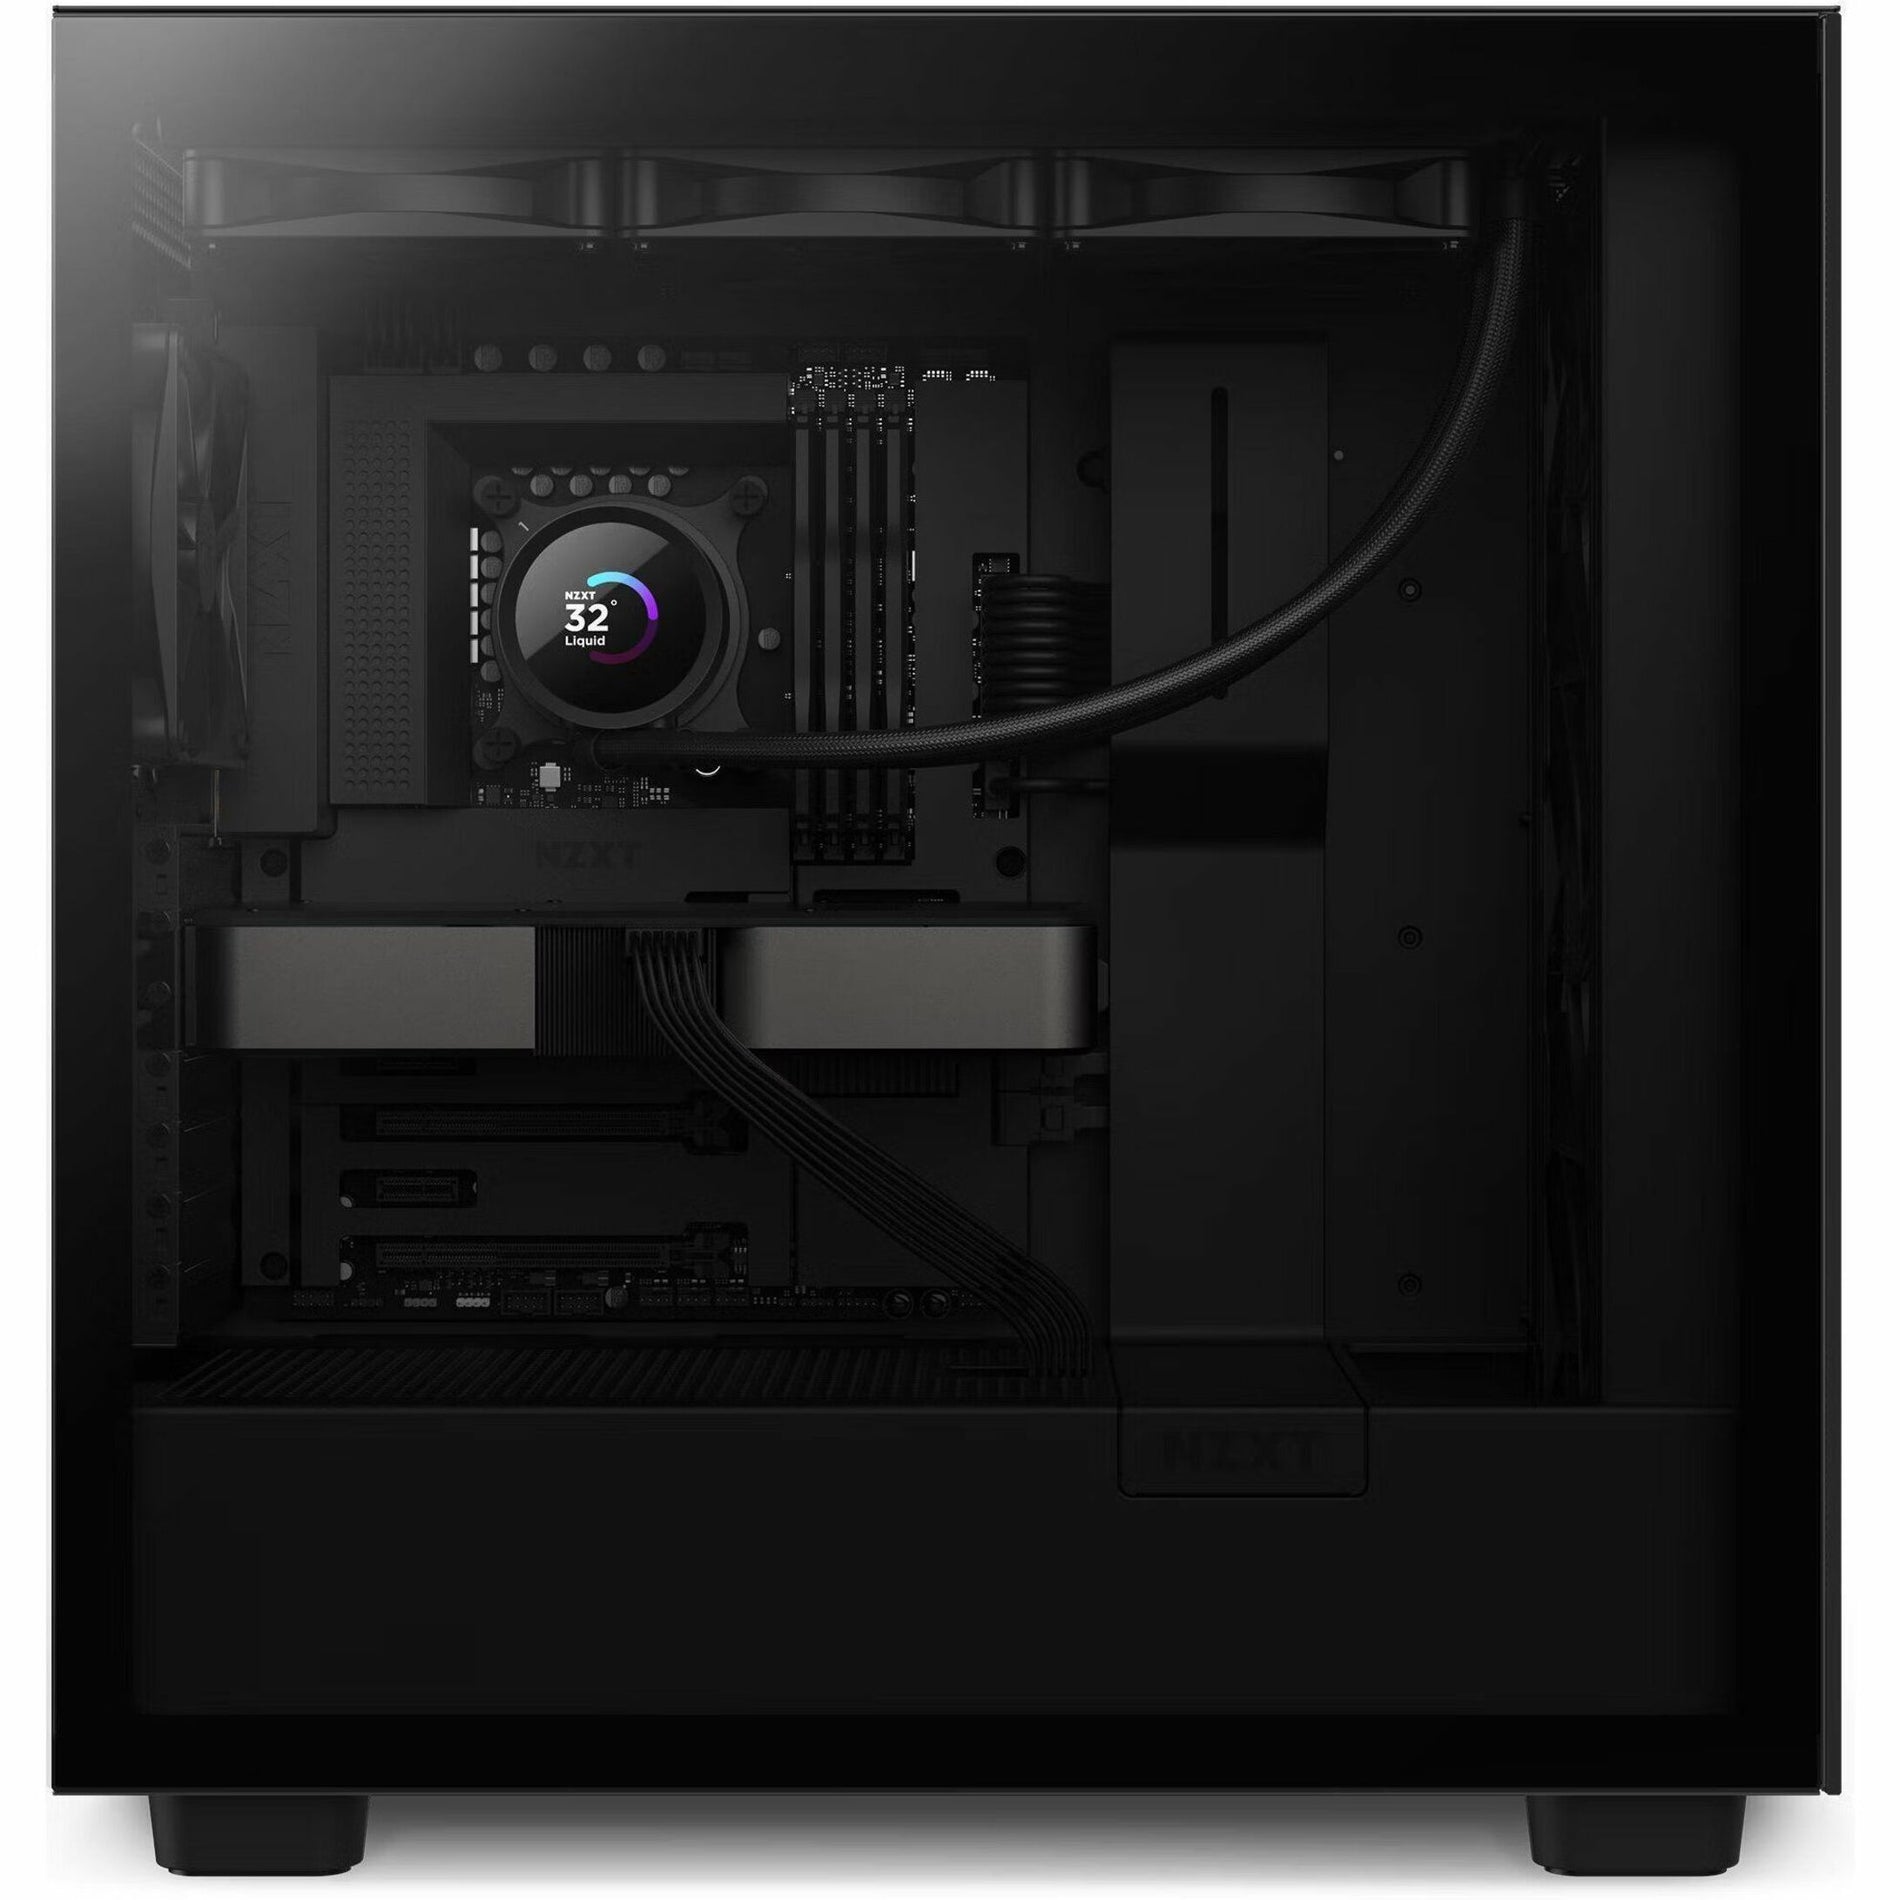 NZXT RL-KN360-B1 Kraken 360 360mm AIO Liquid Cooler with LCD Display, Powerful Cooling for CPU and Computer Case